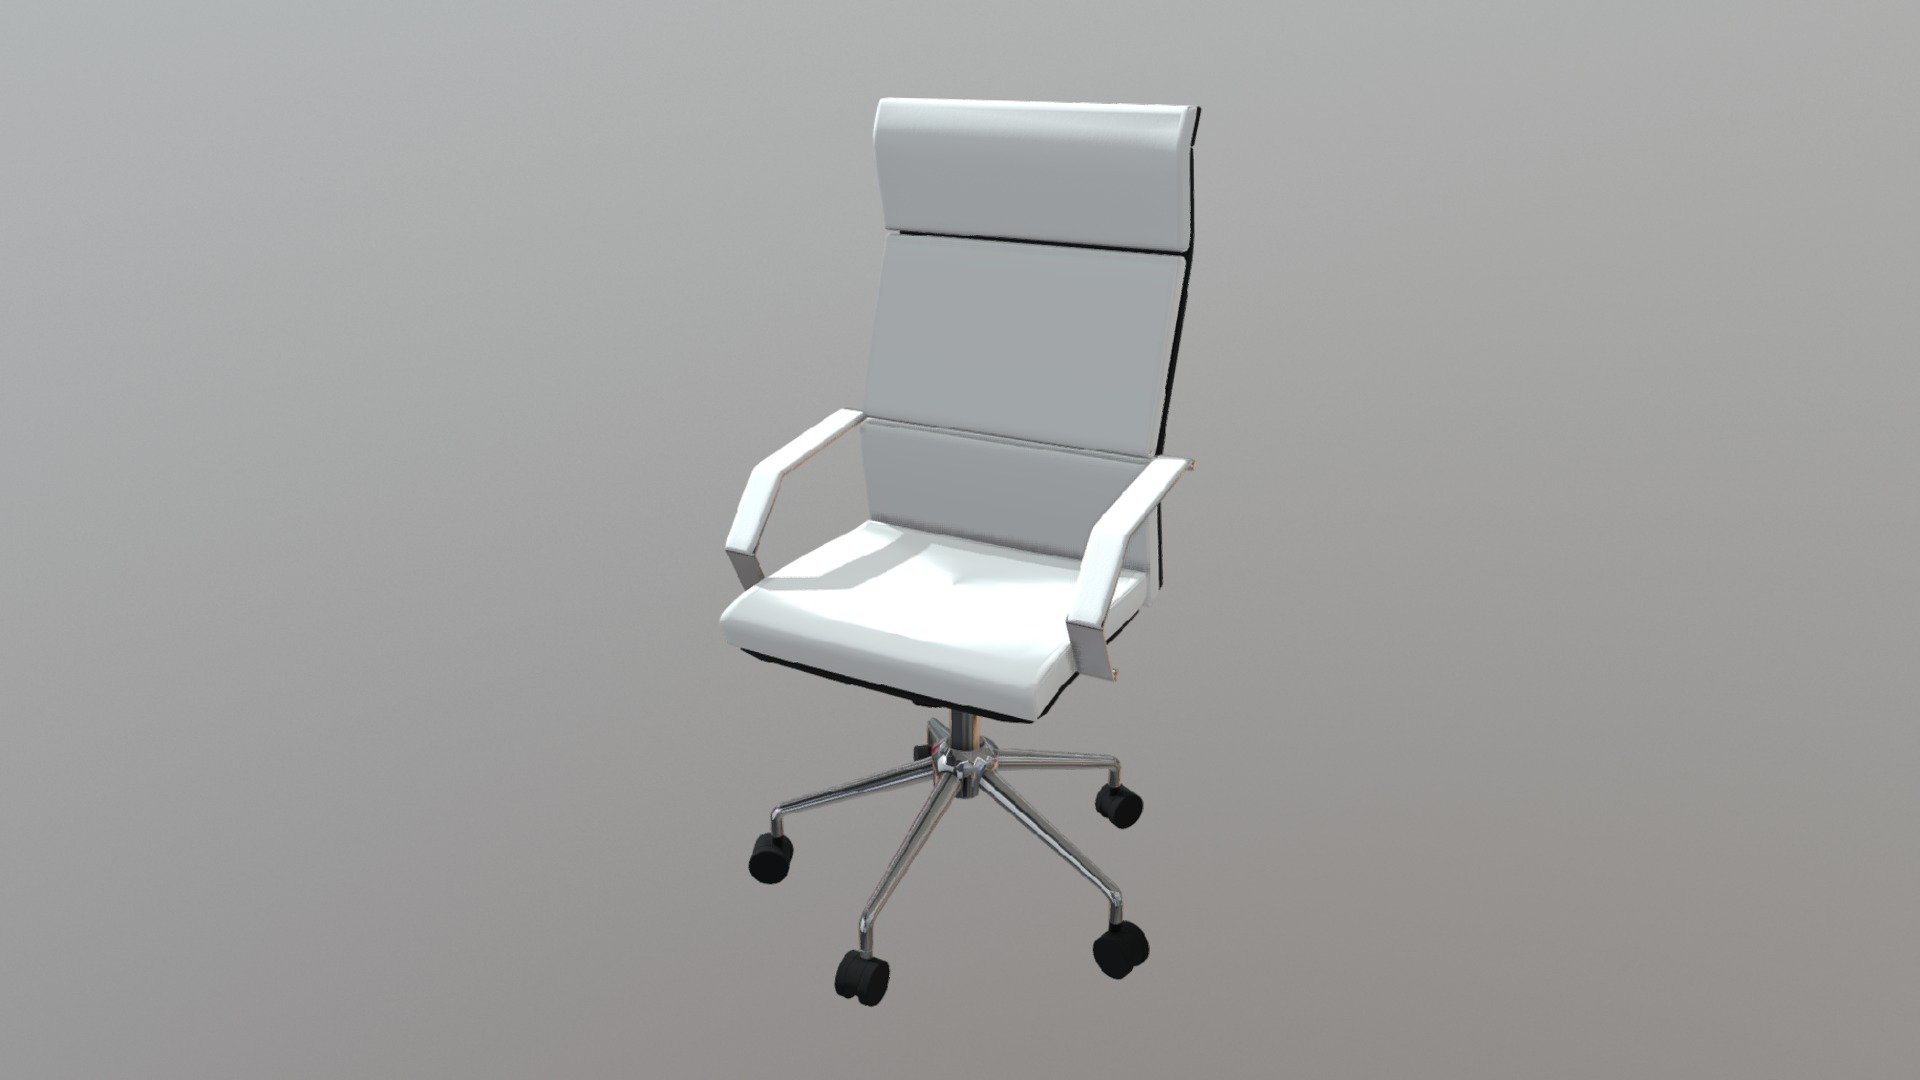 Lider Pro Office Chair White 205311 Download Free 3d Model By Zuo Modern Zuo A928870 Sketchfab